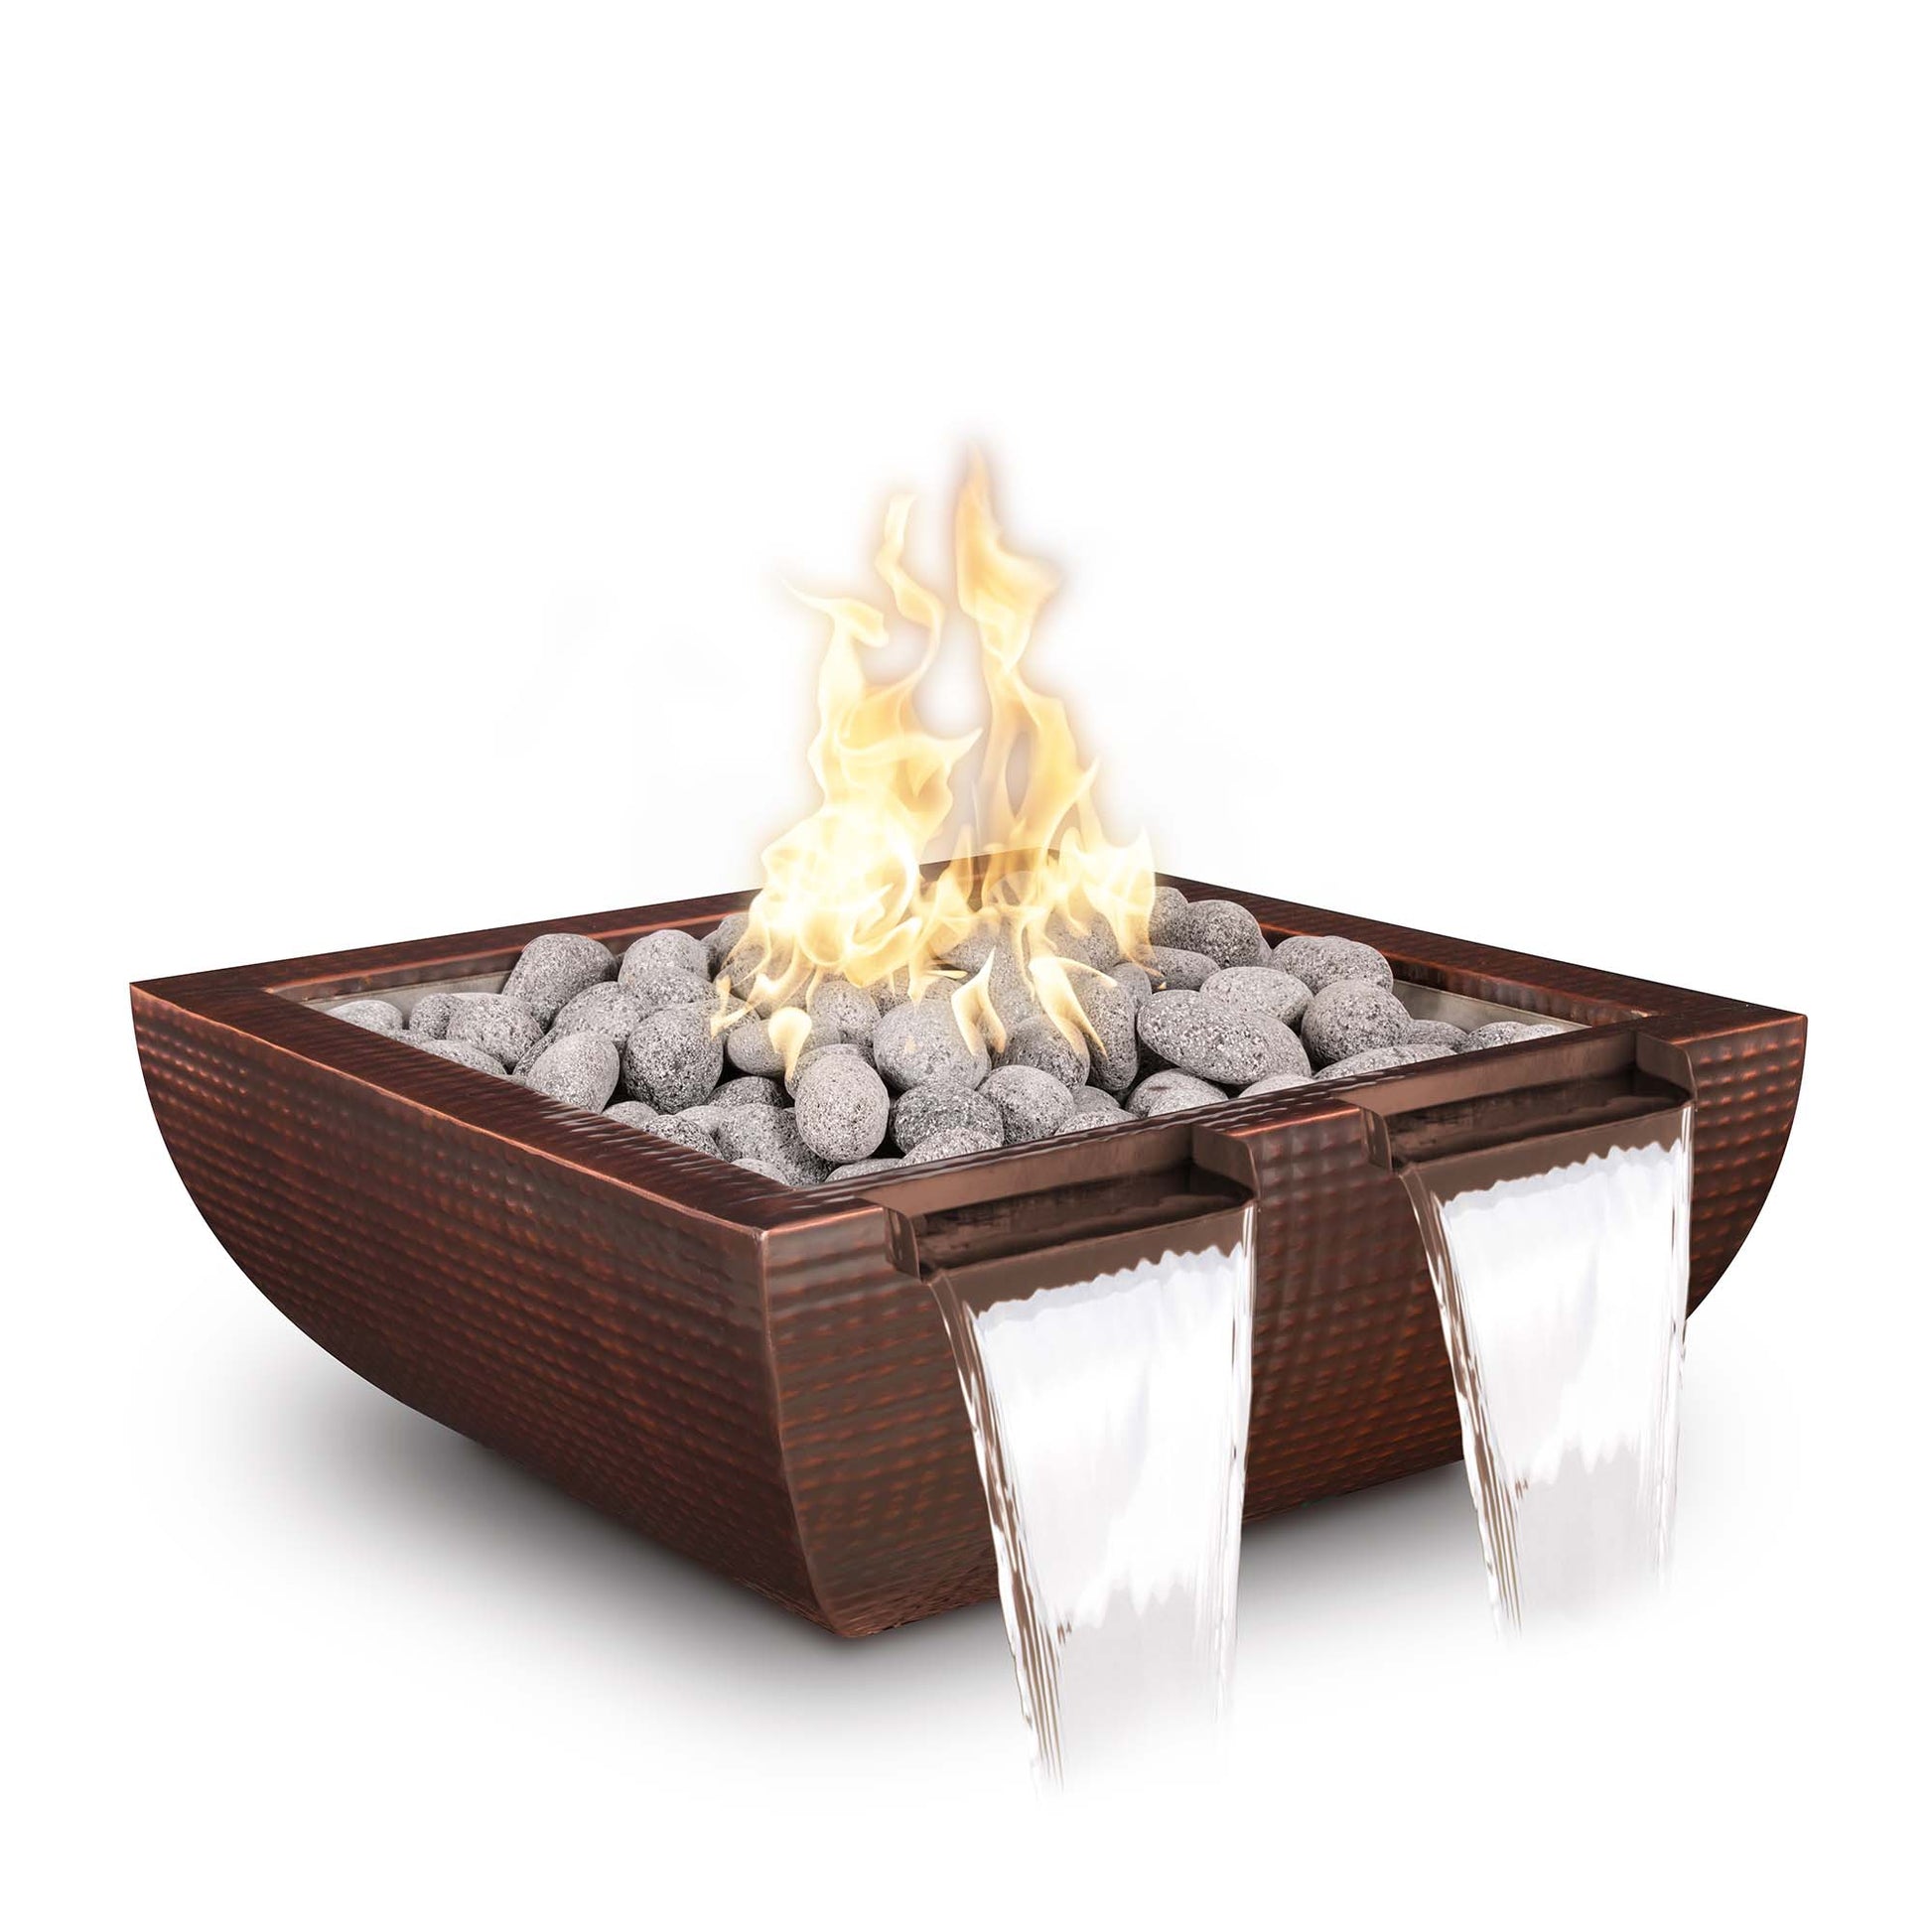 The Outdoor Plus Avalon Twin Spill 24" Silver Vein Powder Coated Metal Liquid Propane Fire & Water Bowl with Match Lit Ignition